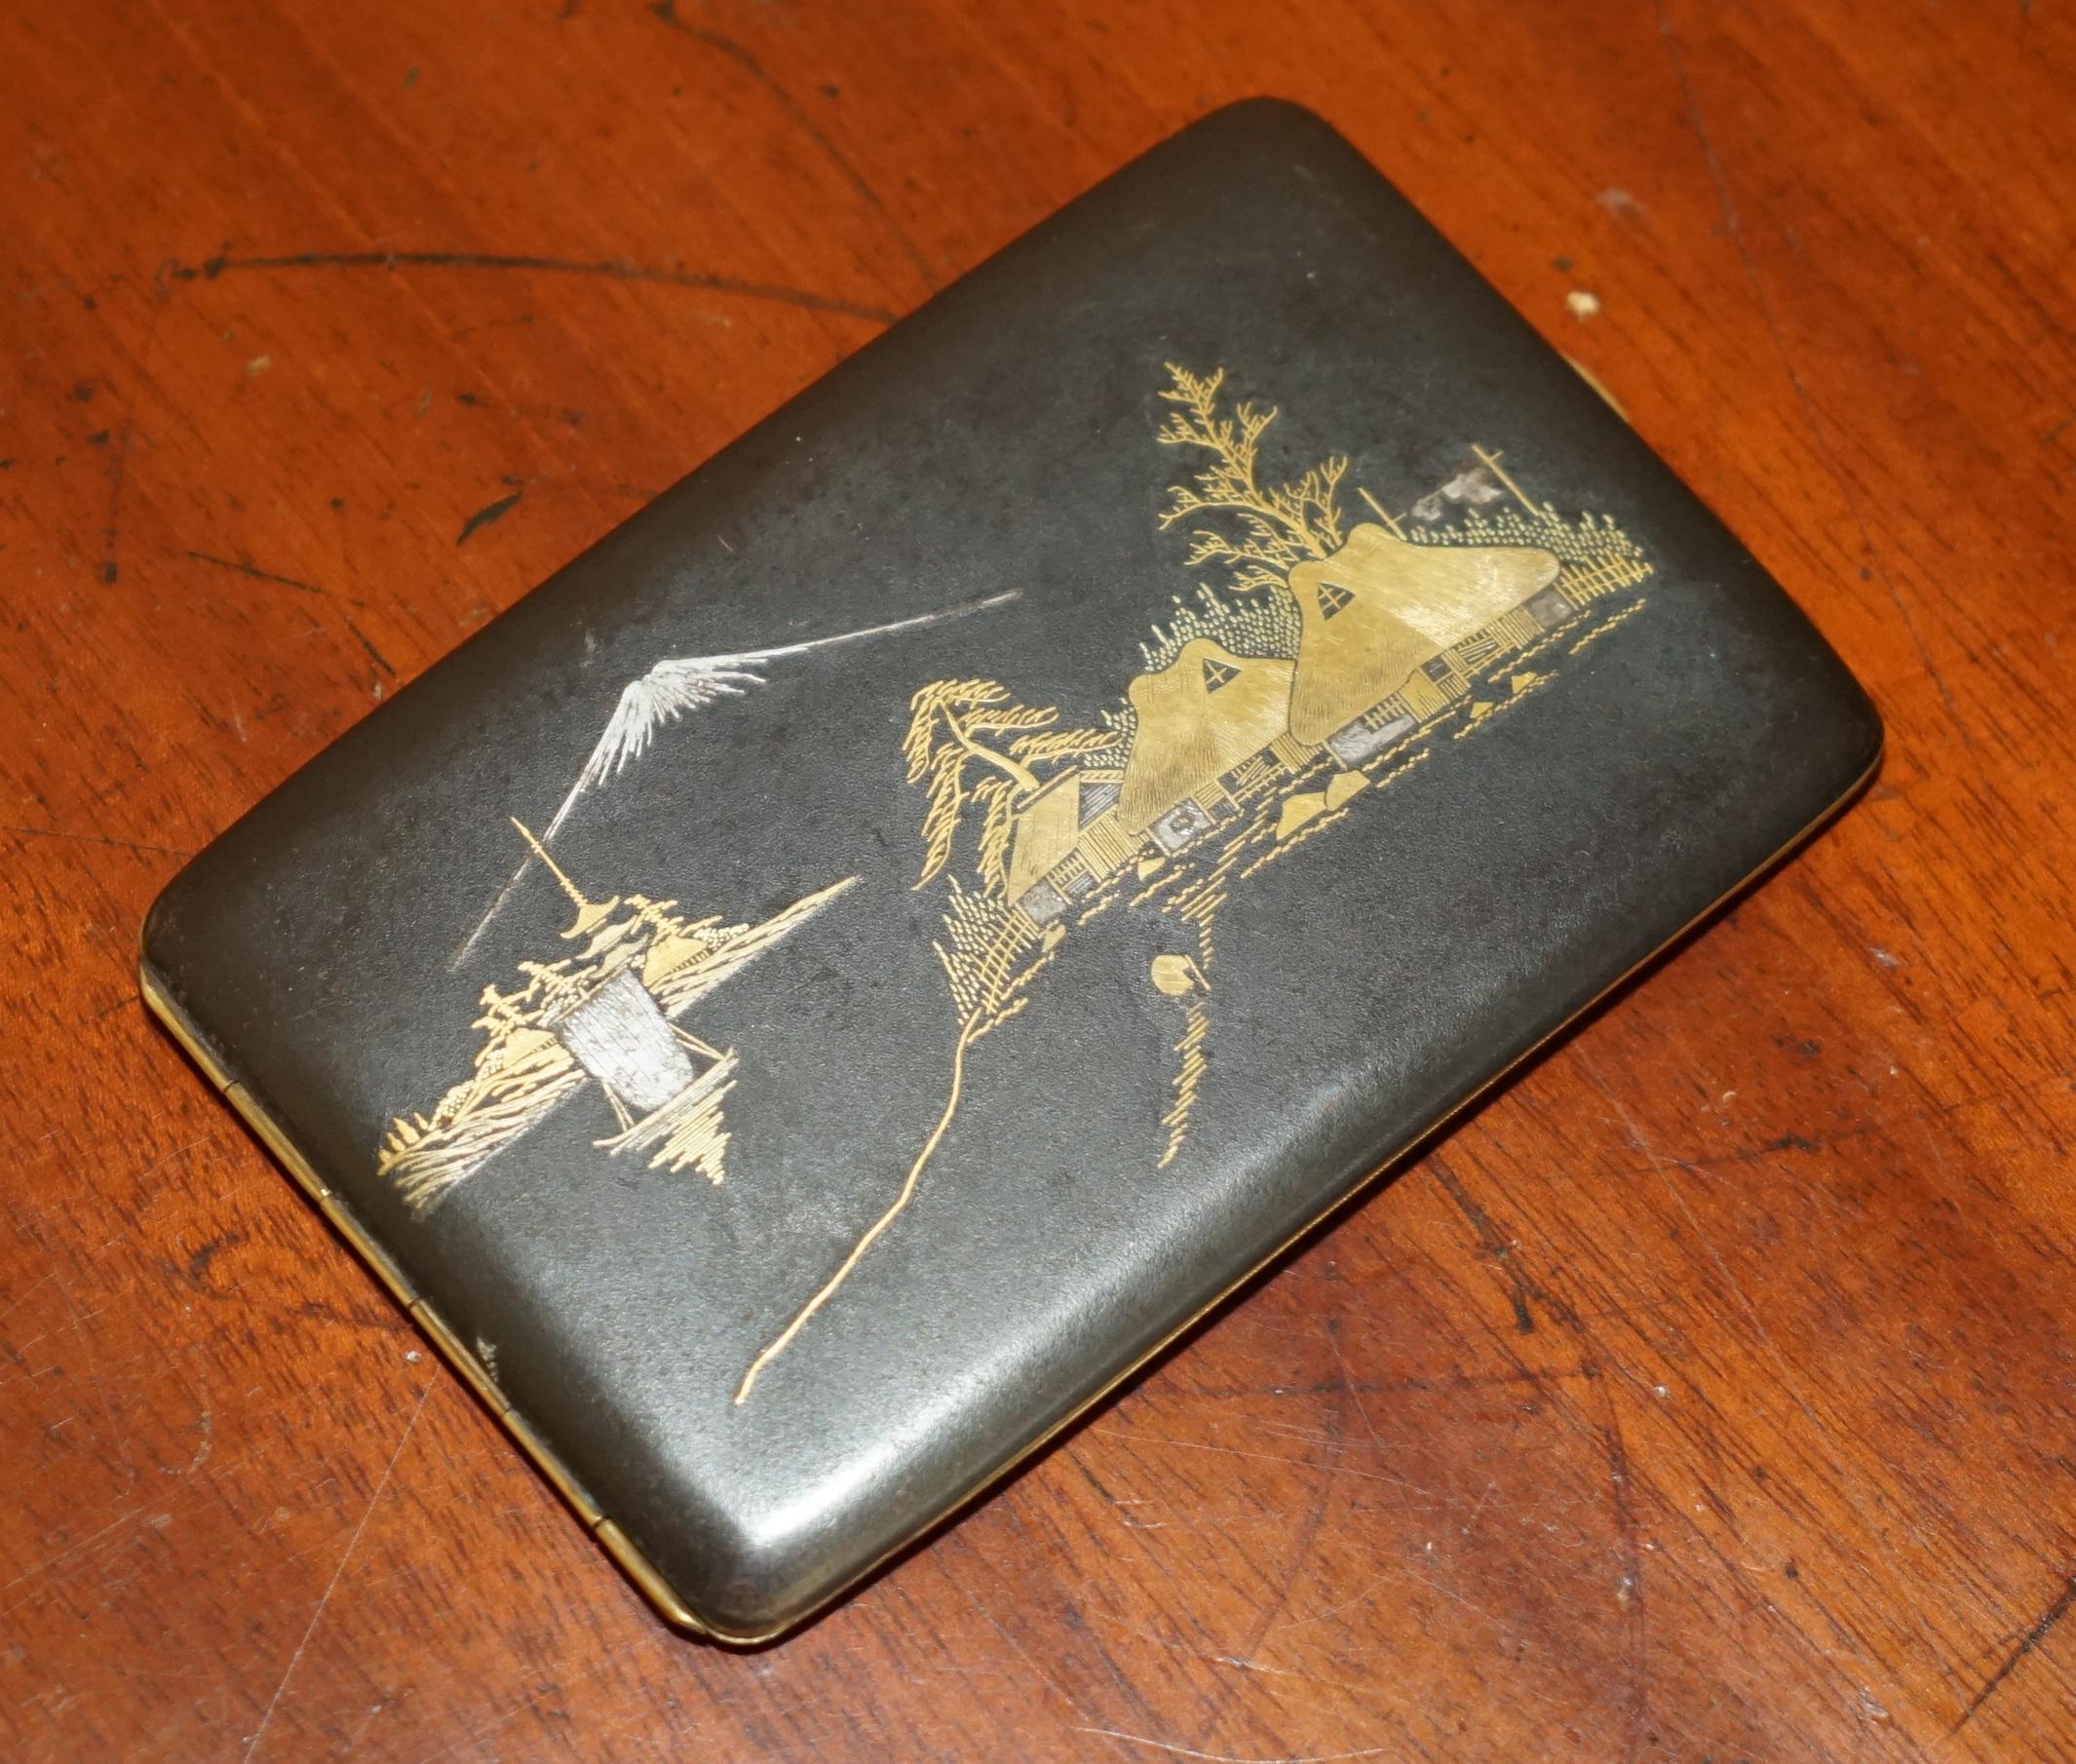 Royal House Antiques

Royal House Antiques is delighted to offer for sale this lovely, super decorative antique Japanese Komei Work signed and stamped 24ct gold decorated cigarette case

A wonderfully original find, this isn’t one of the much later